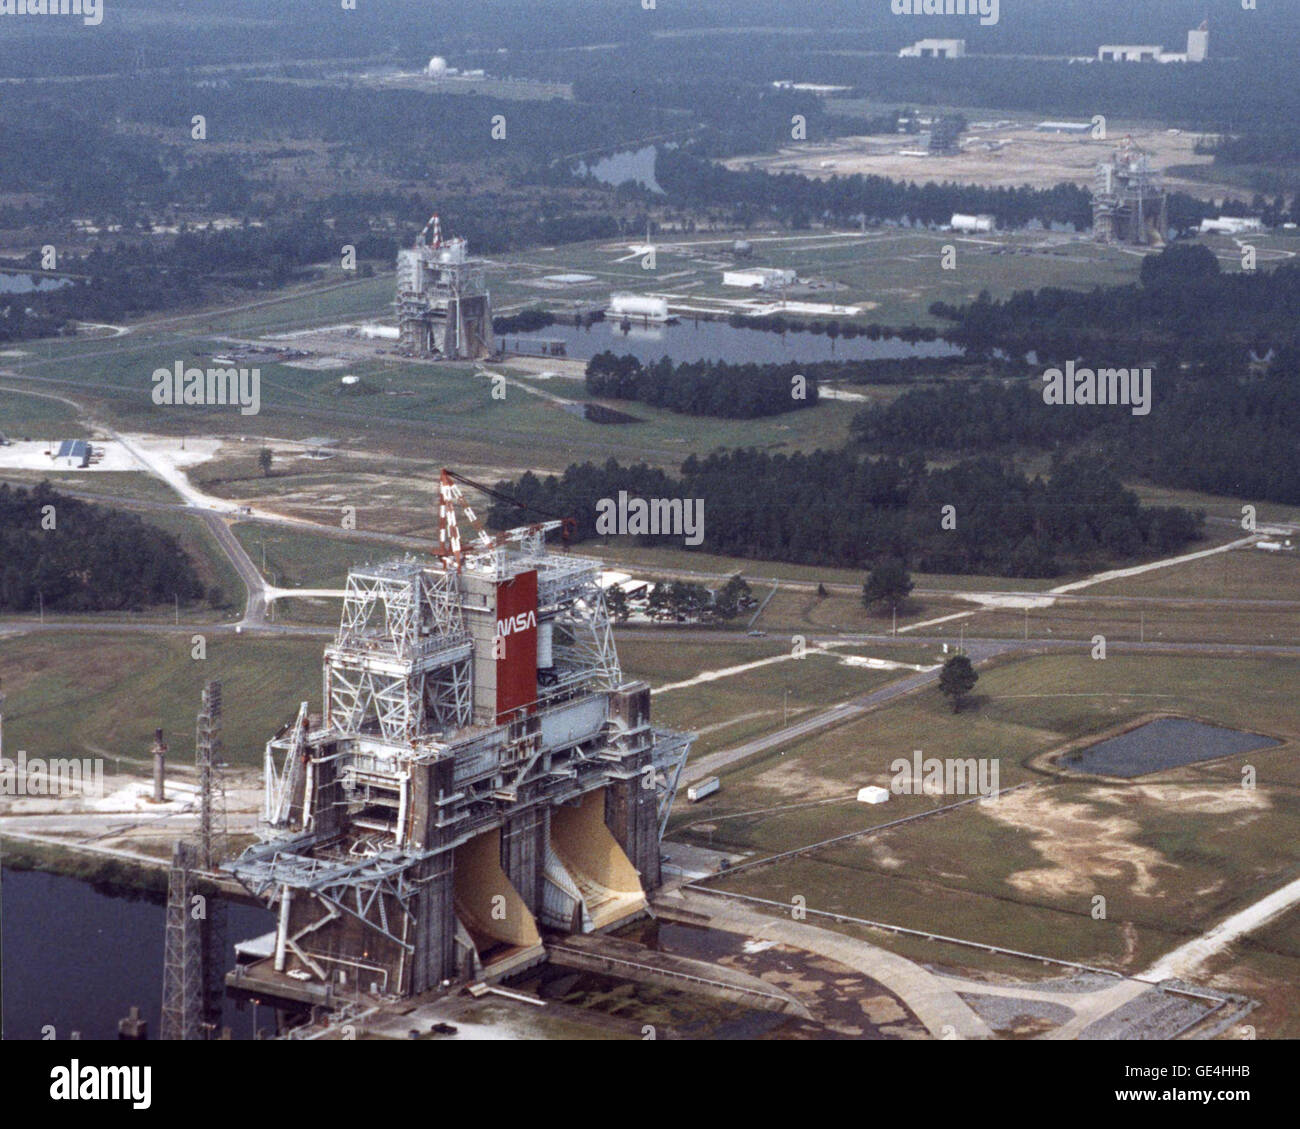 Pictured is the John C. Stennis Space Center's propulsion testing complex. In the foreground is the center's largest Test Stand the B-1, along with the A-2 and A-1 stands. These test stands are used to test the Space Shuttle Main Engines. In the distance can be seen the E-1 Test Facility. It is here that fuel tanks and materials for future spacecraft are tested. Stock Photo